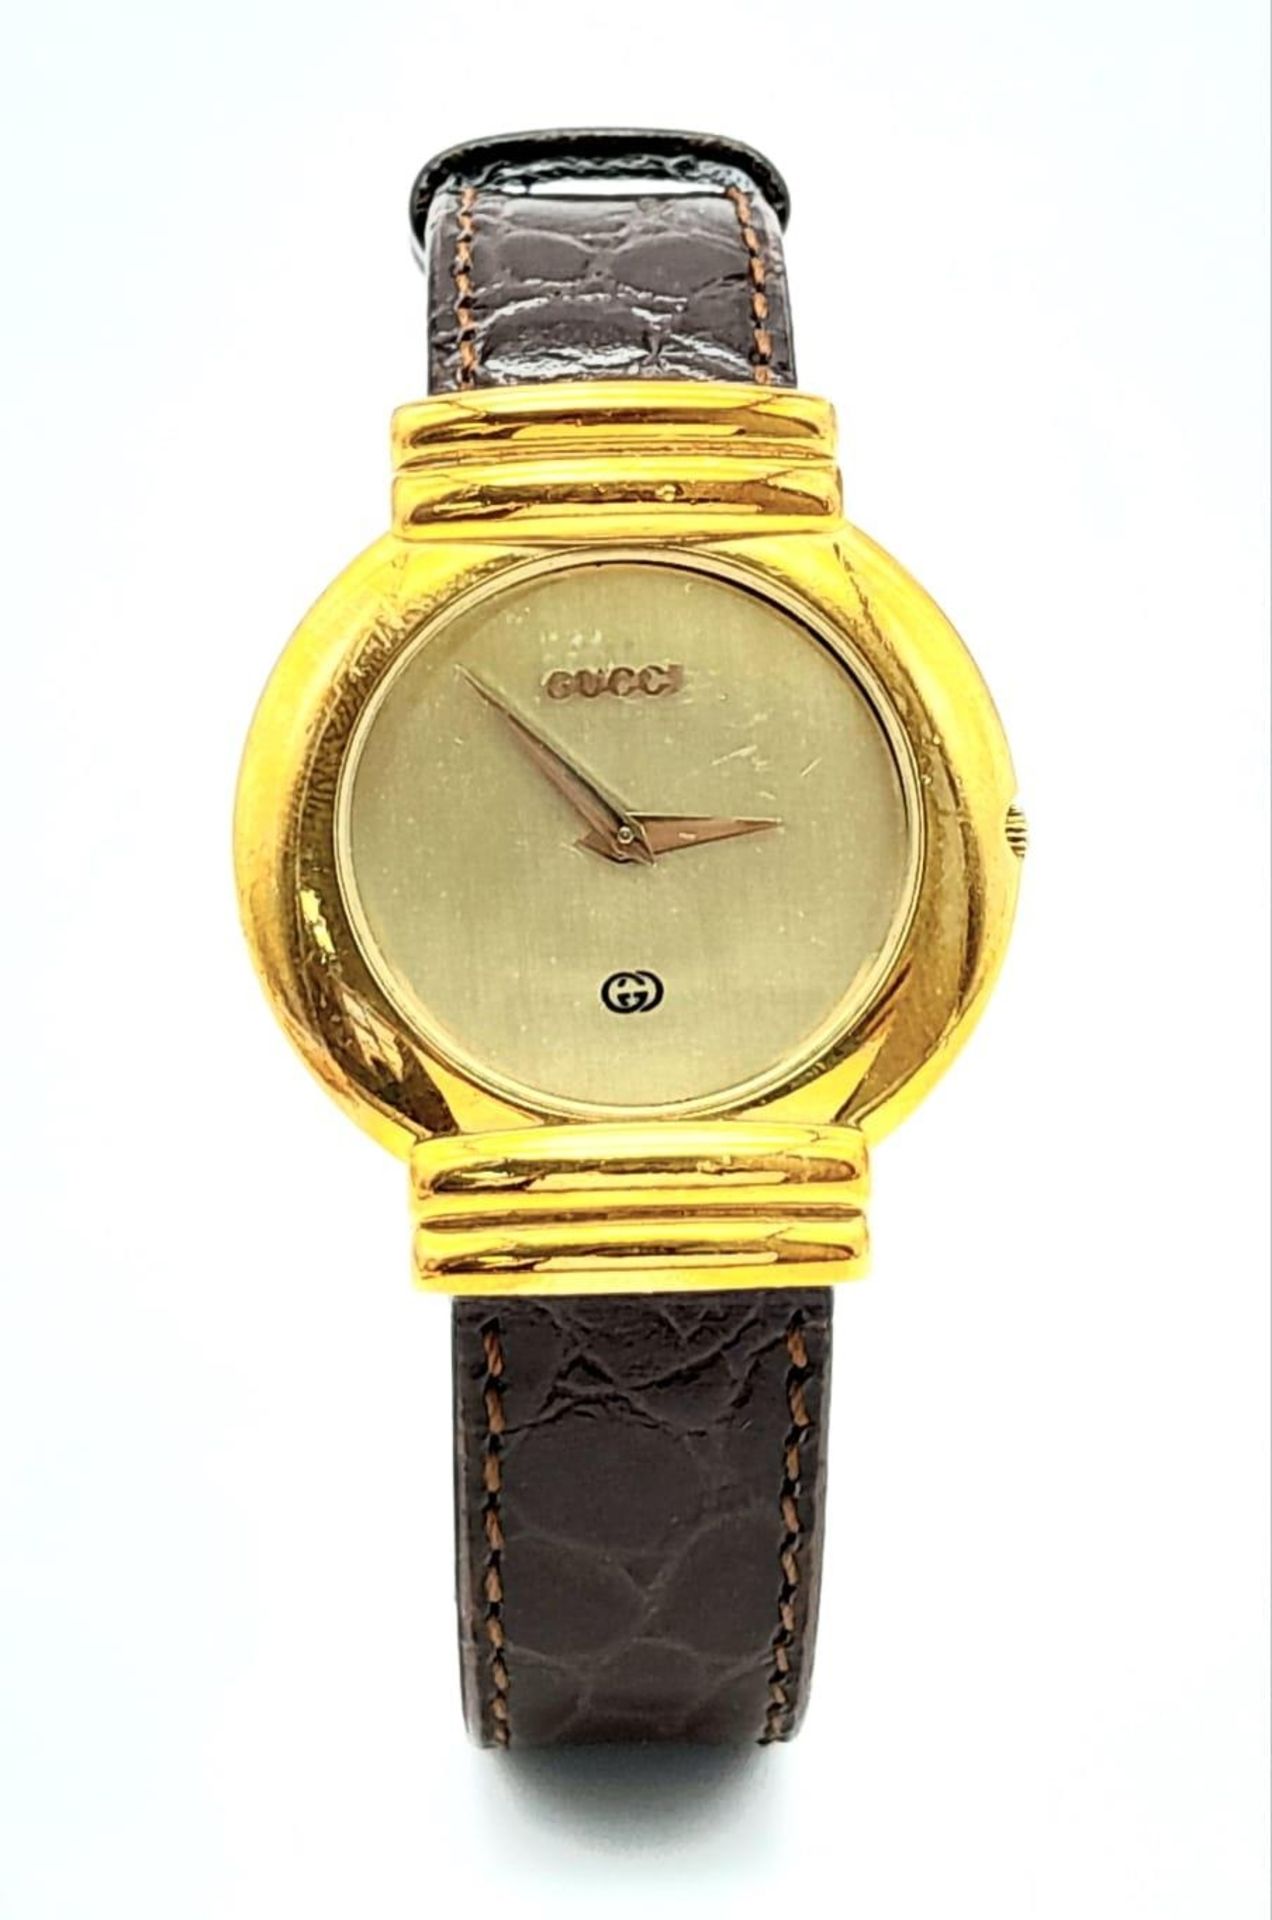 A gold plated GUCCI with crocodile skin strap, case: 33 mm, gold coloured dial and hands, Swiss made - Image 2 of 7